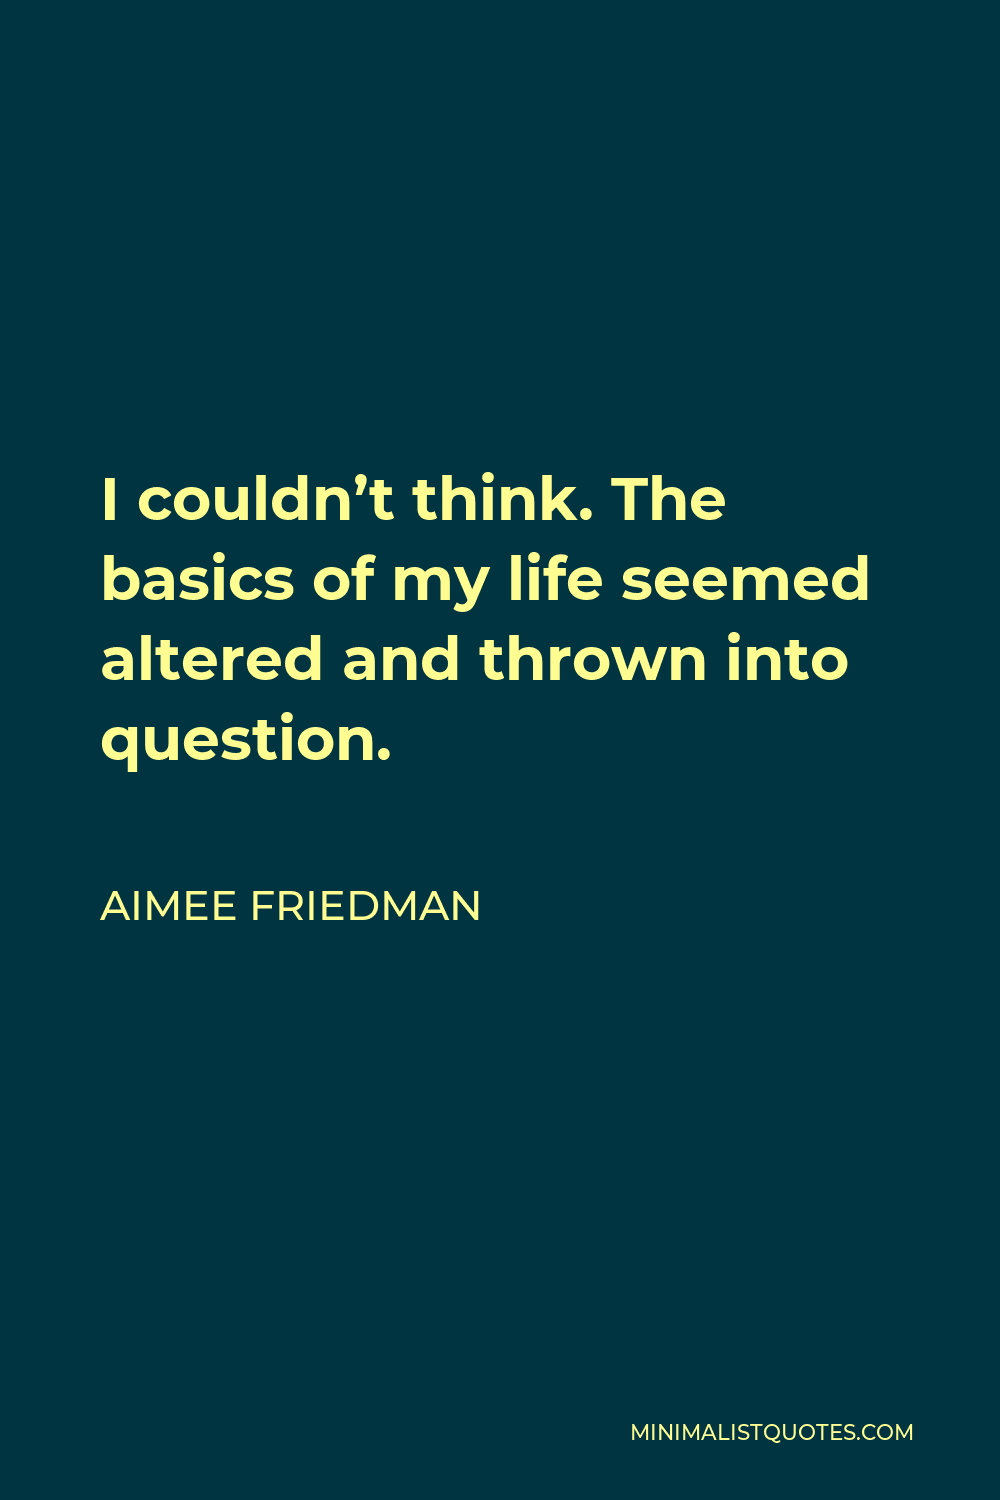 Aimee Friedman Quote - I couldn’t think. The basics of my life seemed altered and thrown into question.